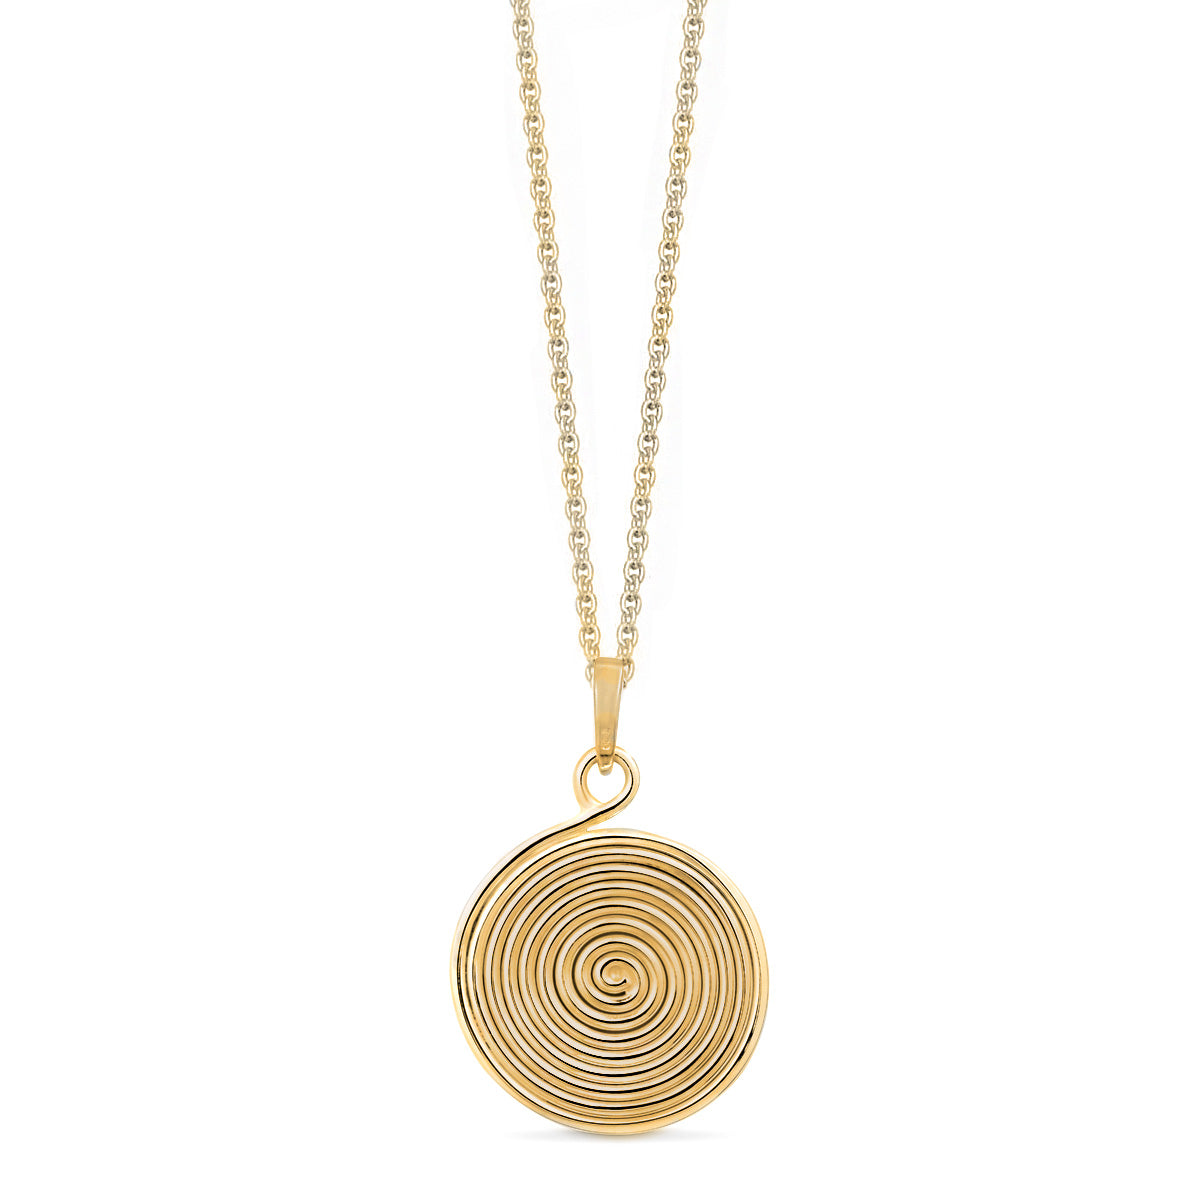 Sterling Silver or Gold Plated Spiral Necklace